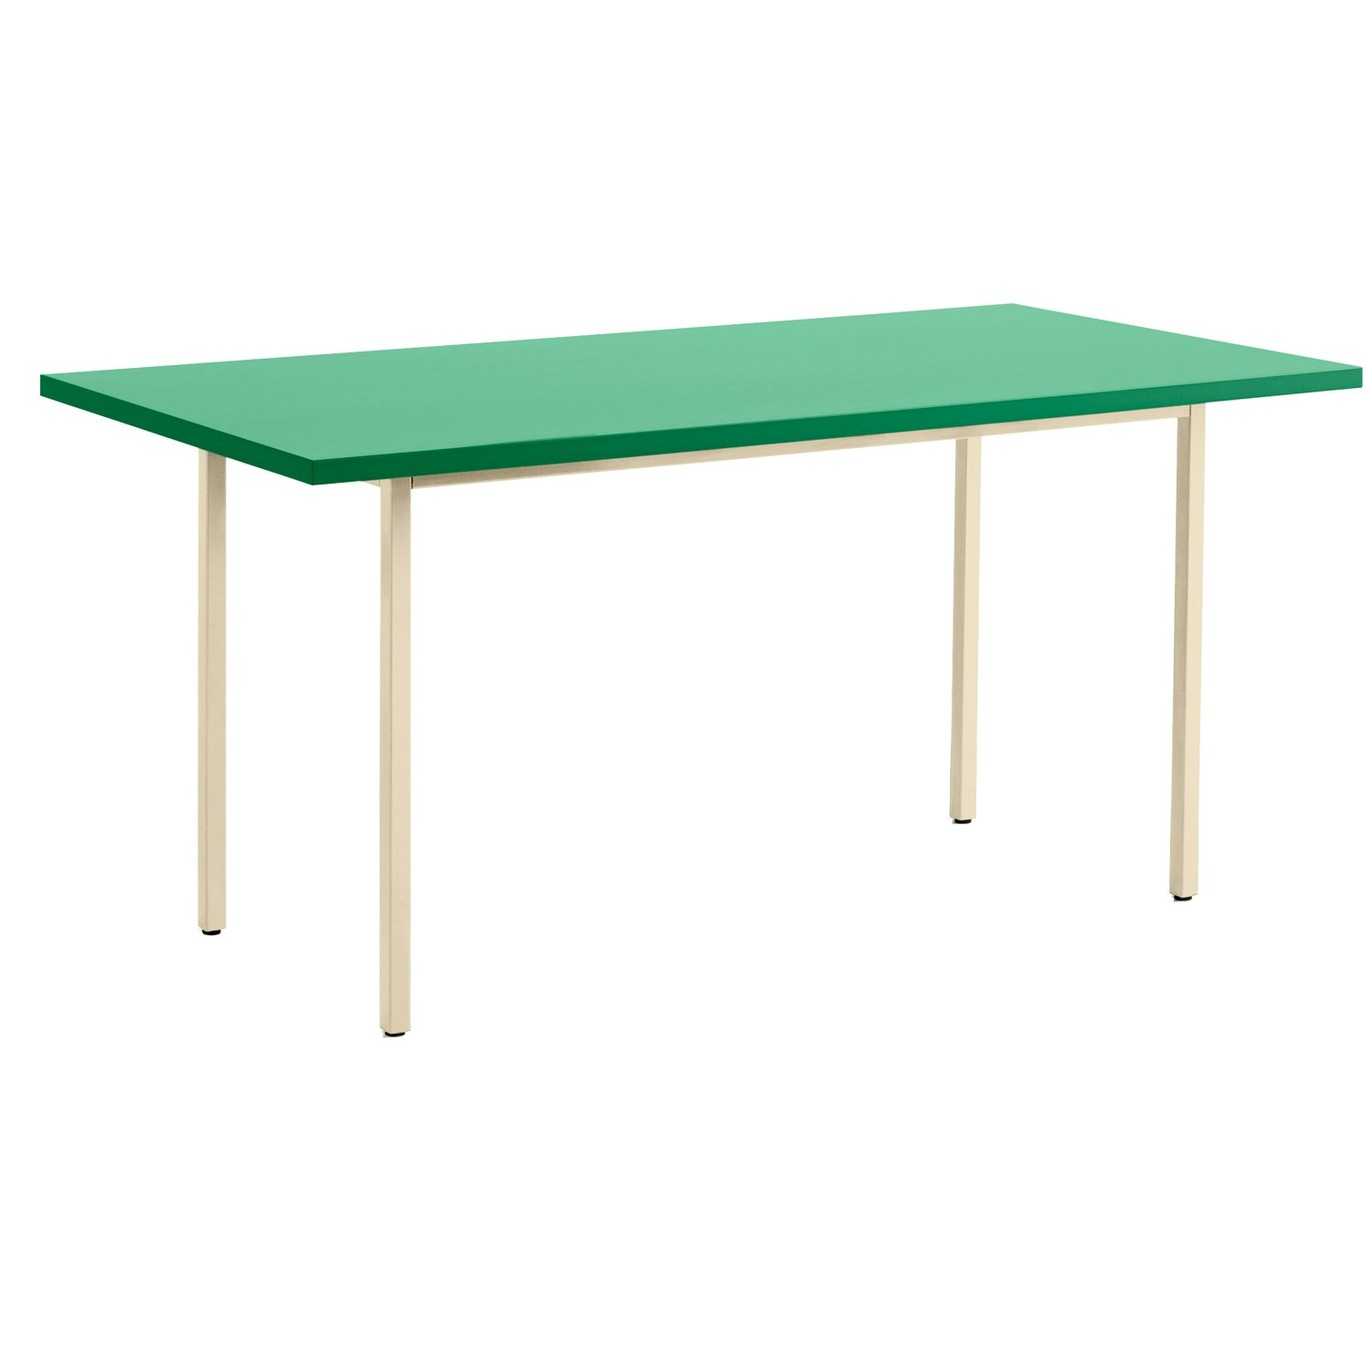 Two-Colour Table, Ivory 160x82 cm, Ivory / Green Mint